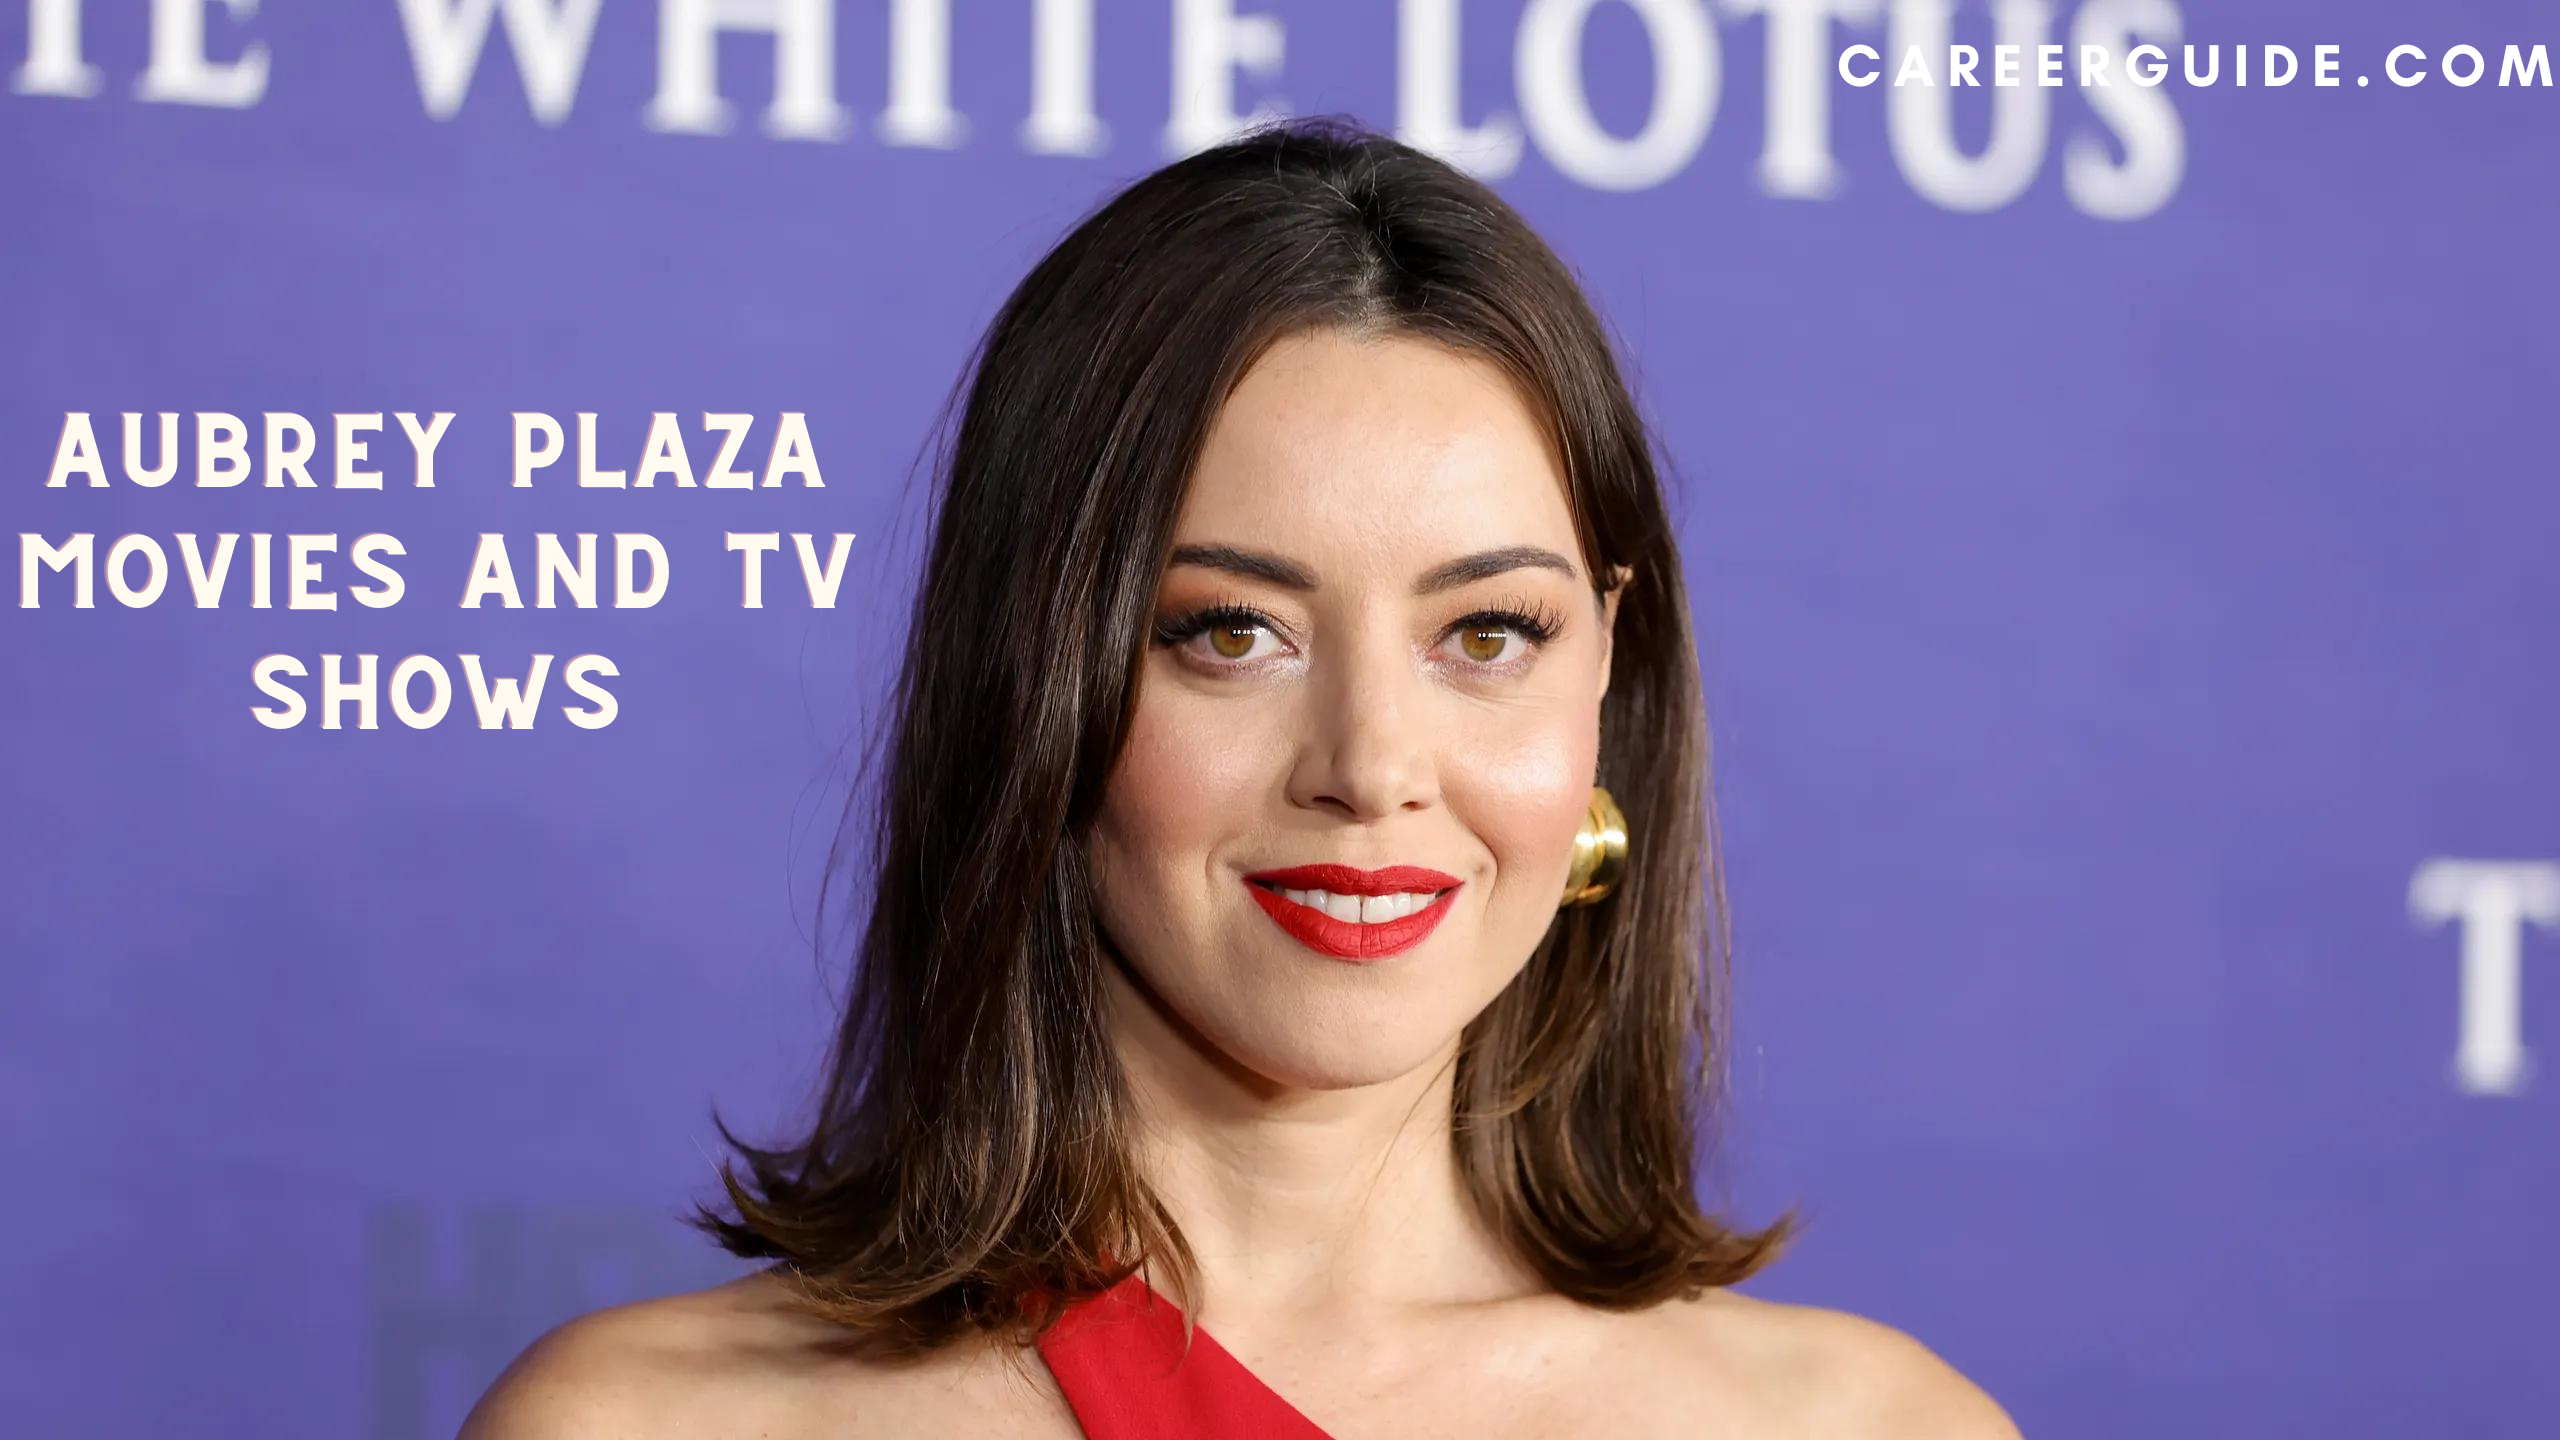 Aubrey Plaza Movies And Tv Shows